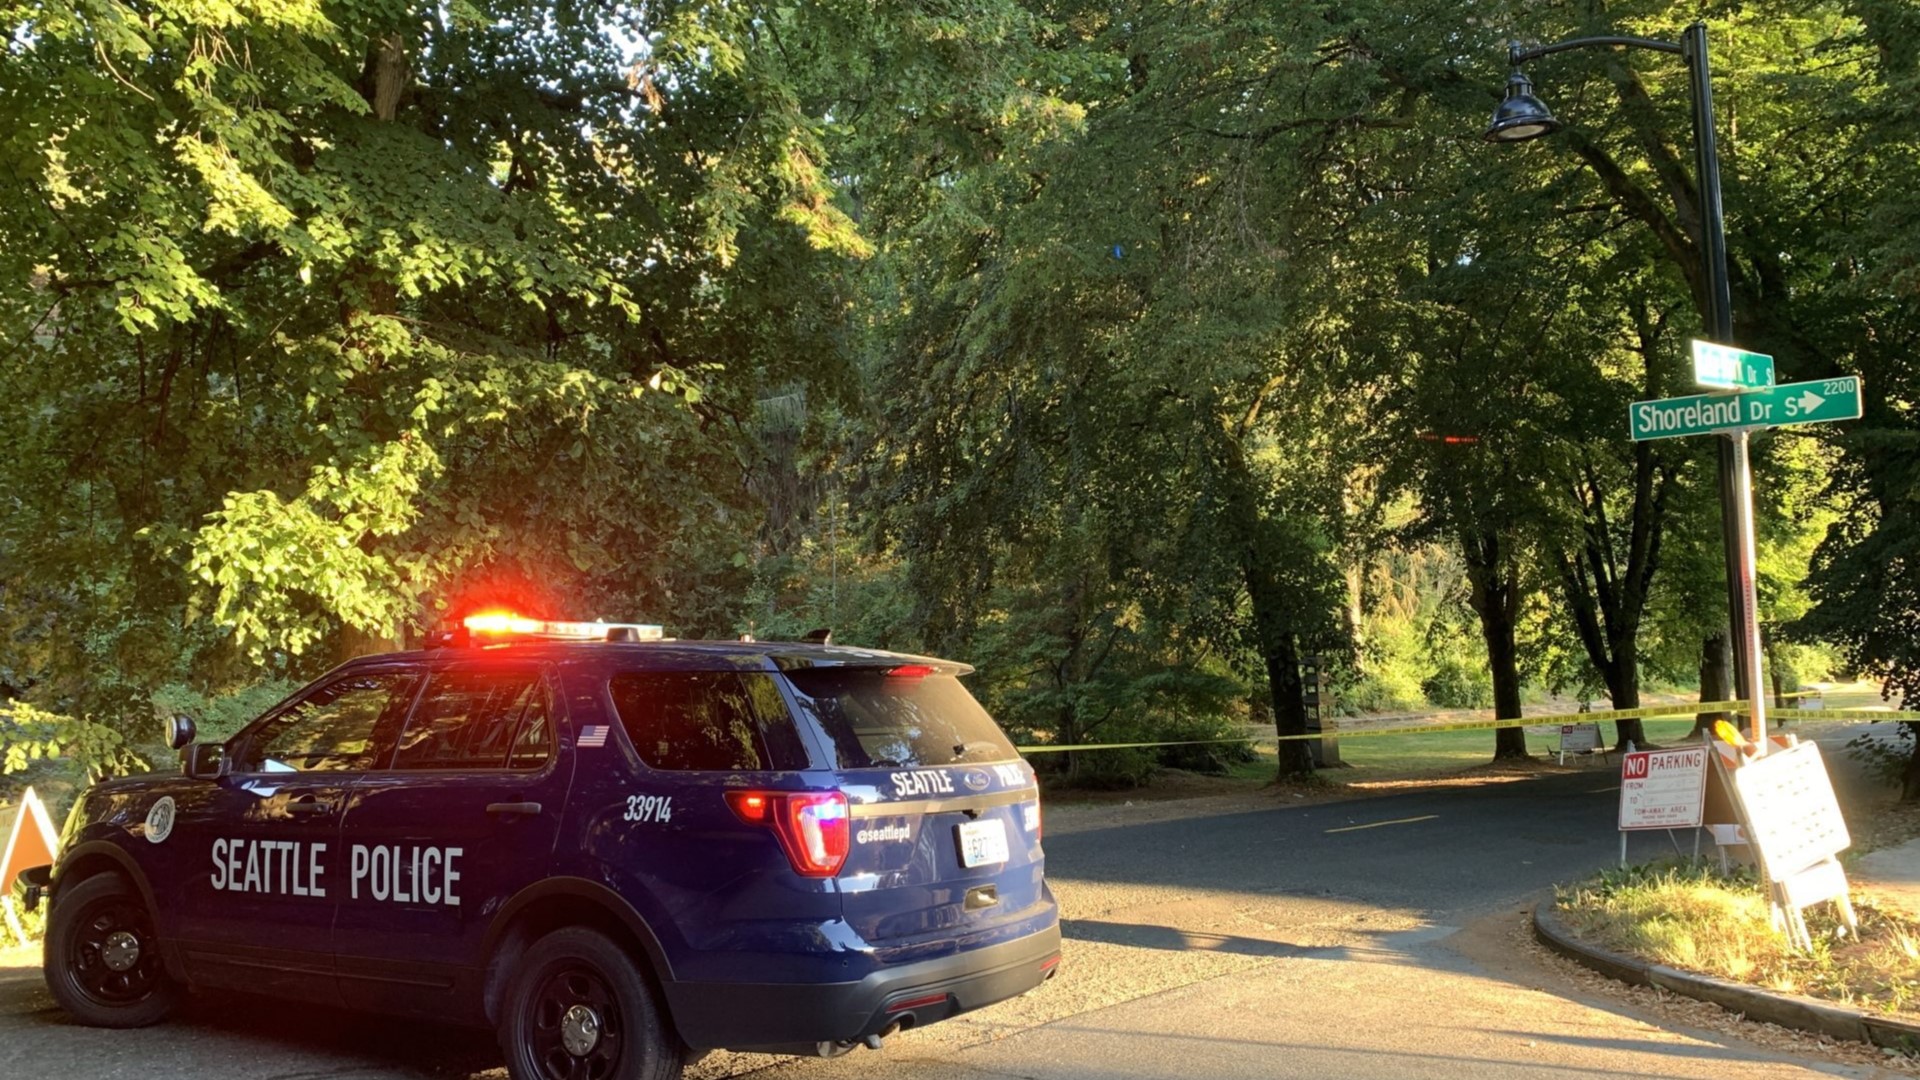 The Seattle Police Department said a man was found with a fatal gunshot wound in the Mount Baker neighborhood Saturday morning.